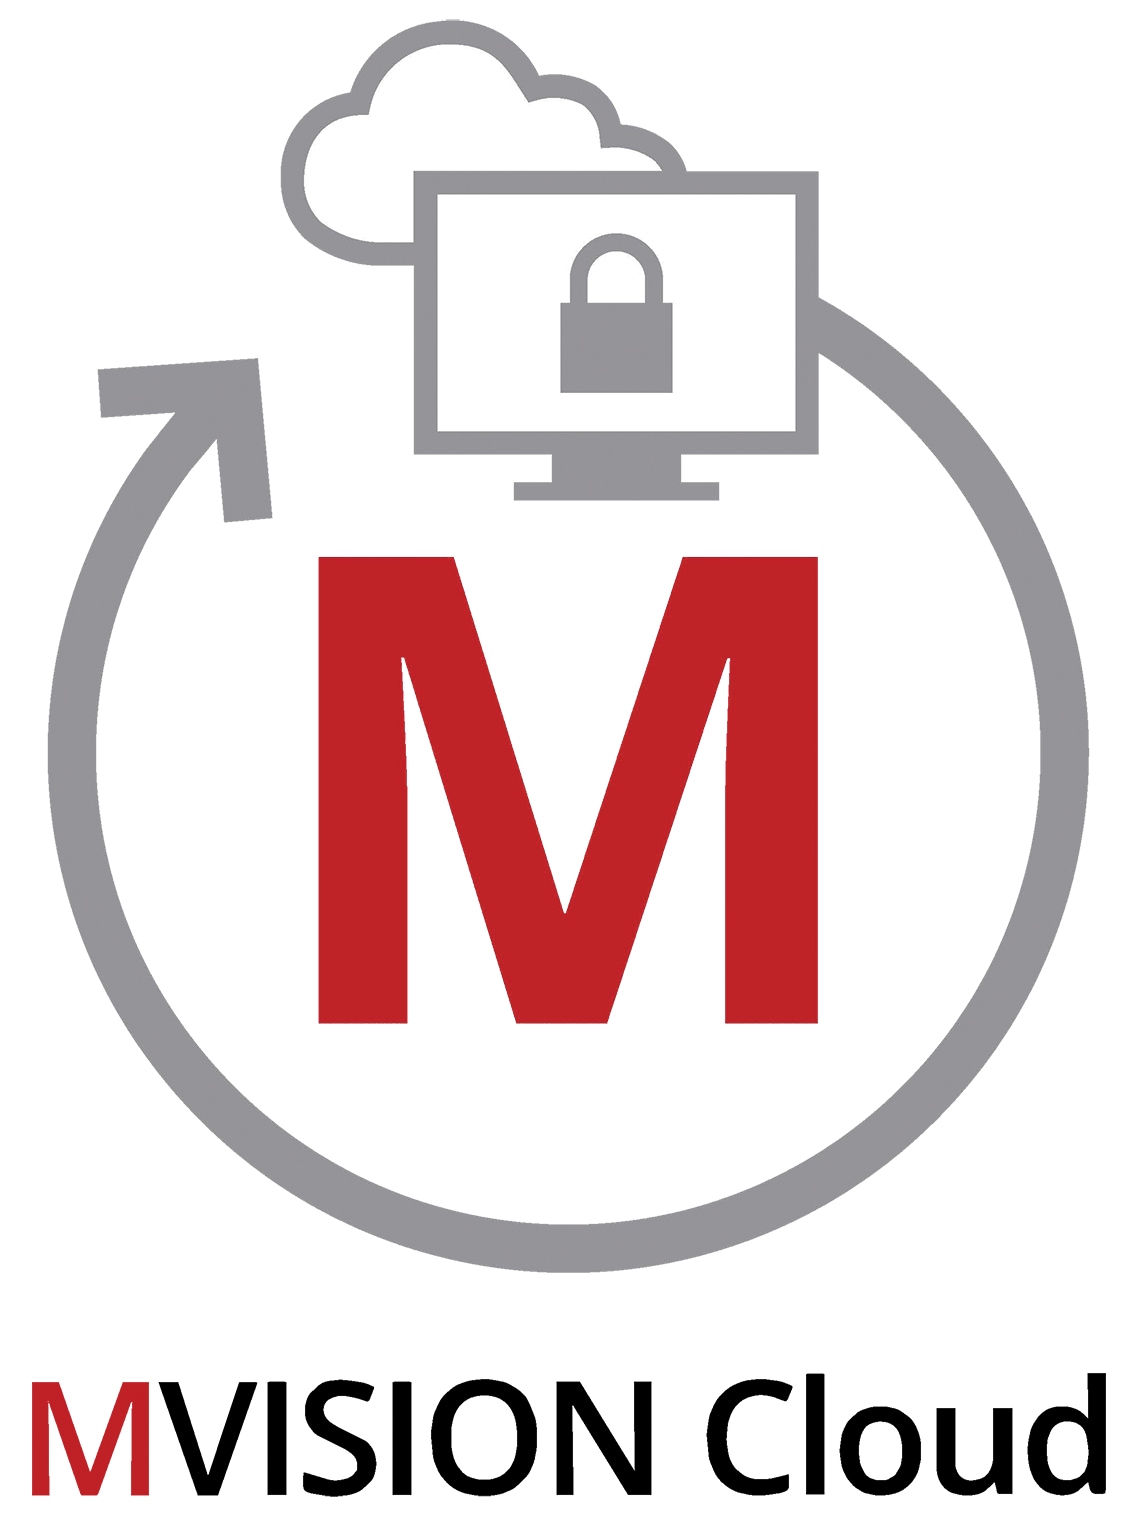 McAfee MVISION Standard - subscription license (1 year) + 1 Year Business Software Support - 1 license